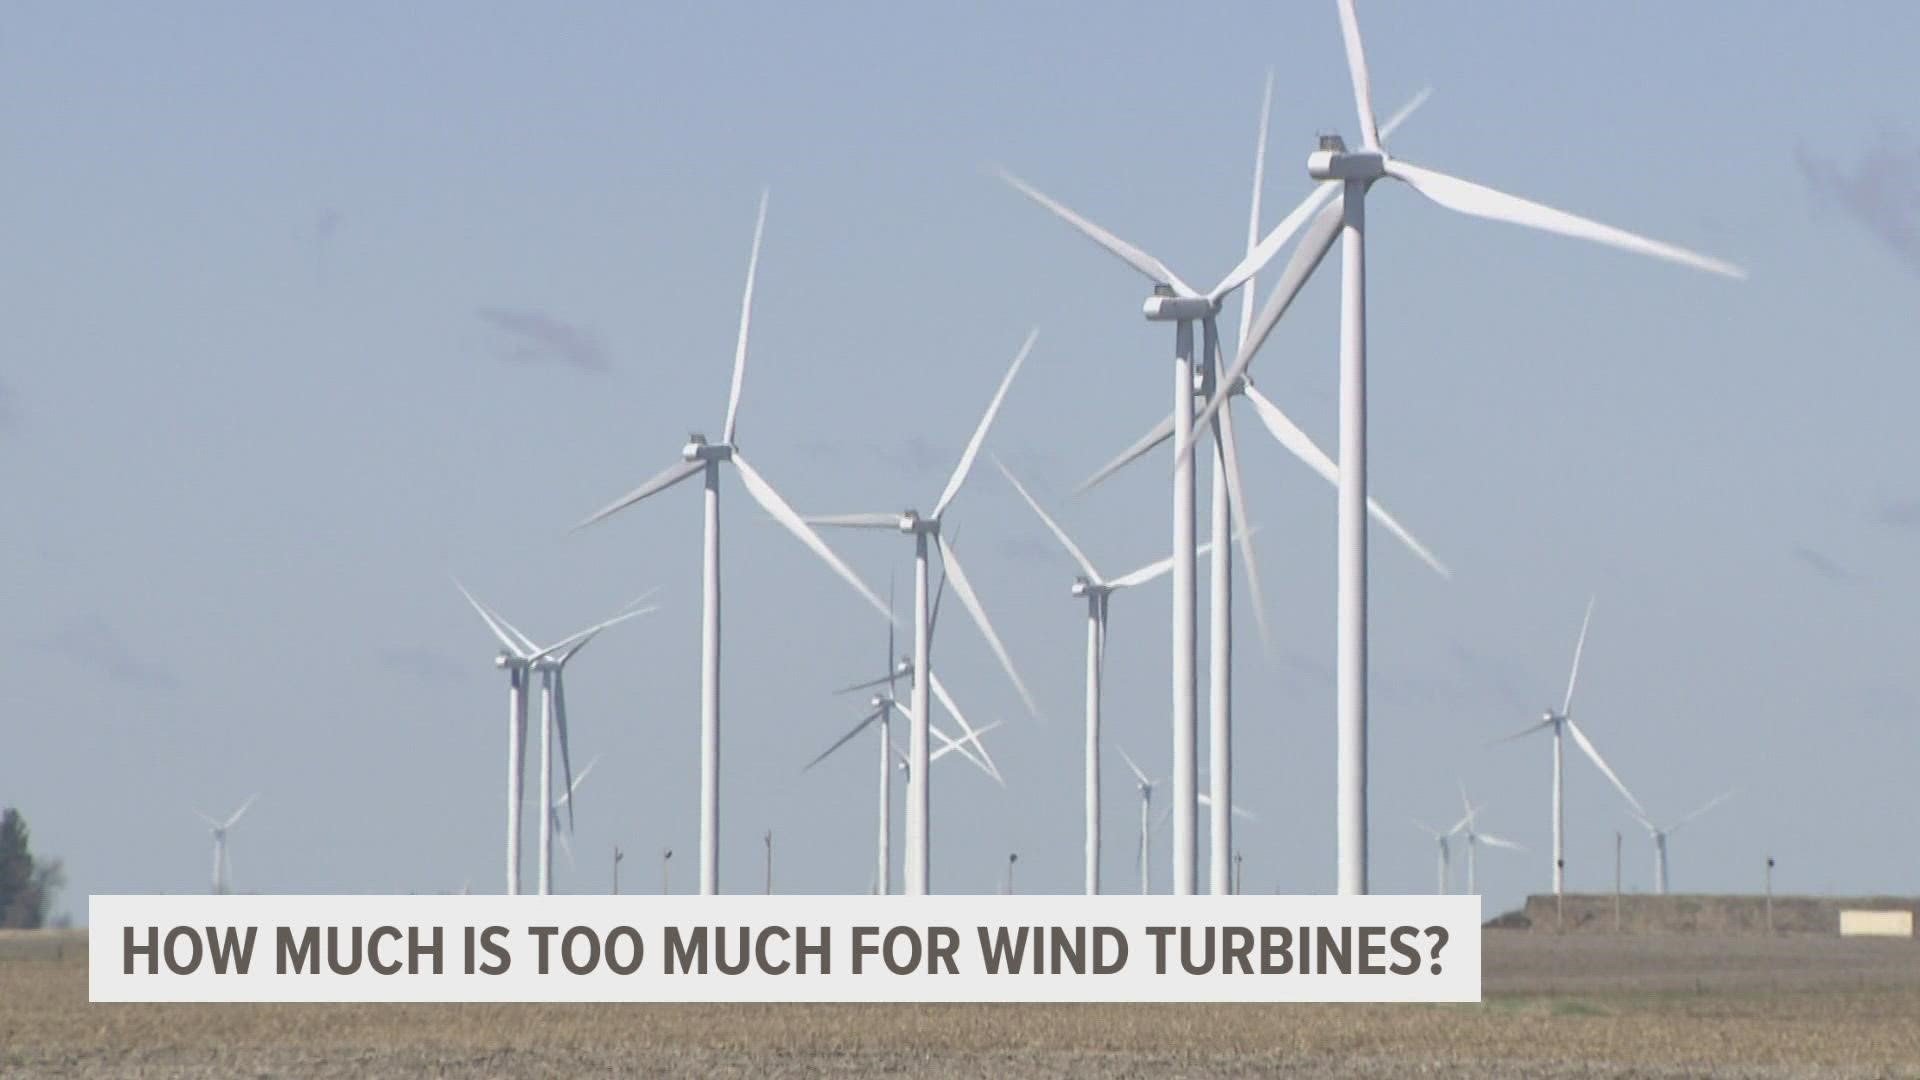 It varies from turbine to turbine, as different manufacturers and models have varied thresholds for when they must go into "storm mode".